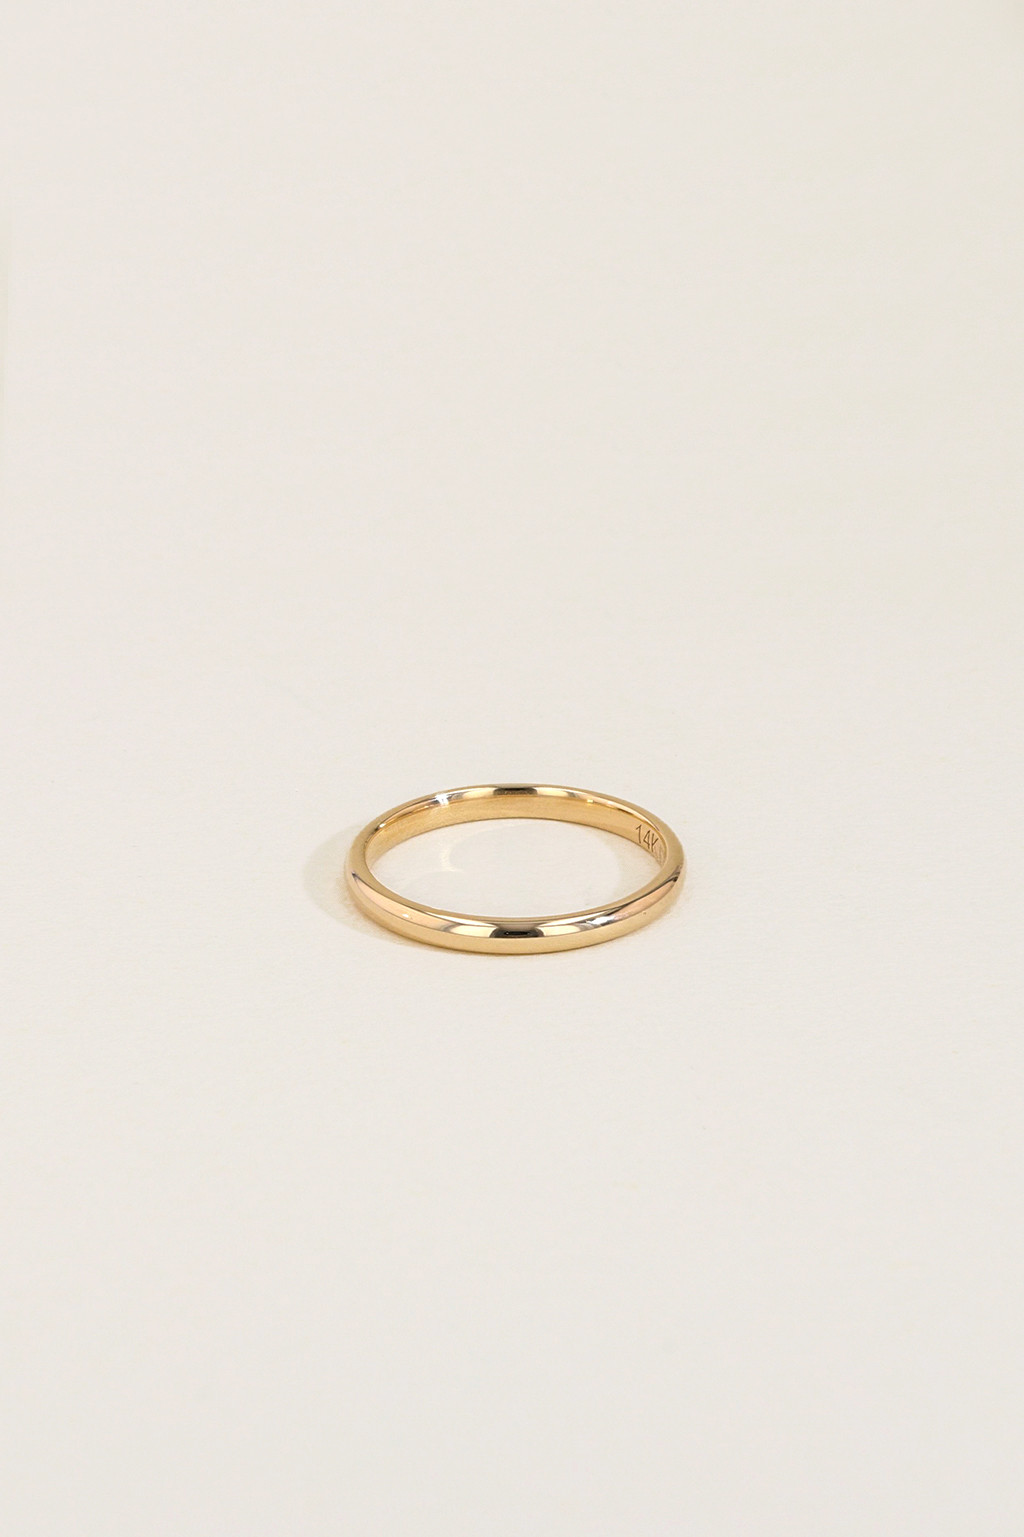 The Classic Gold Wedding Ring